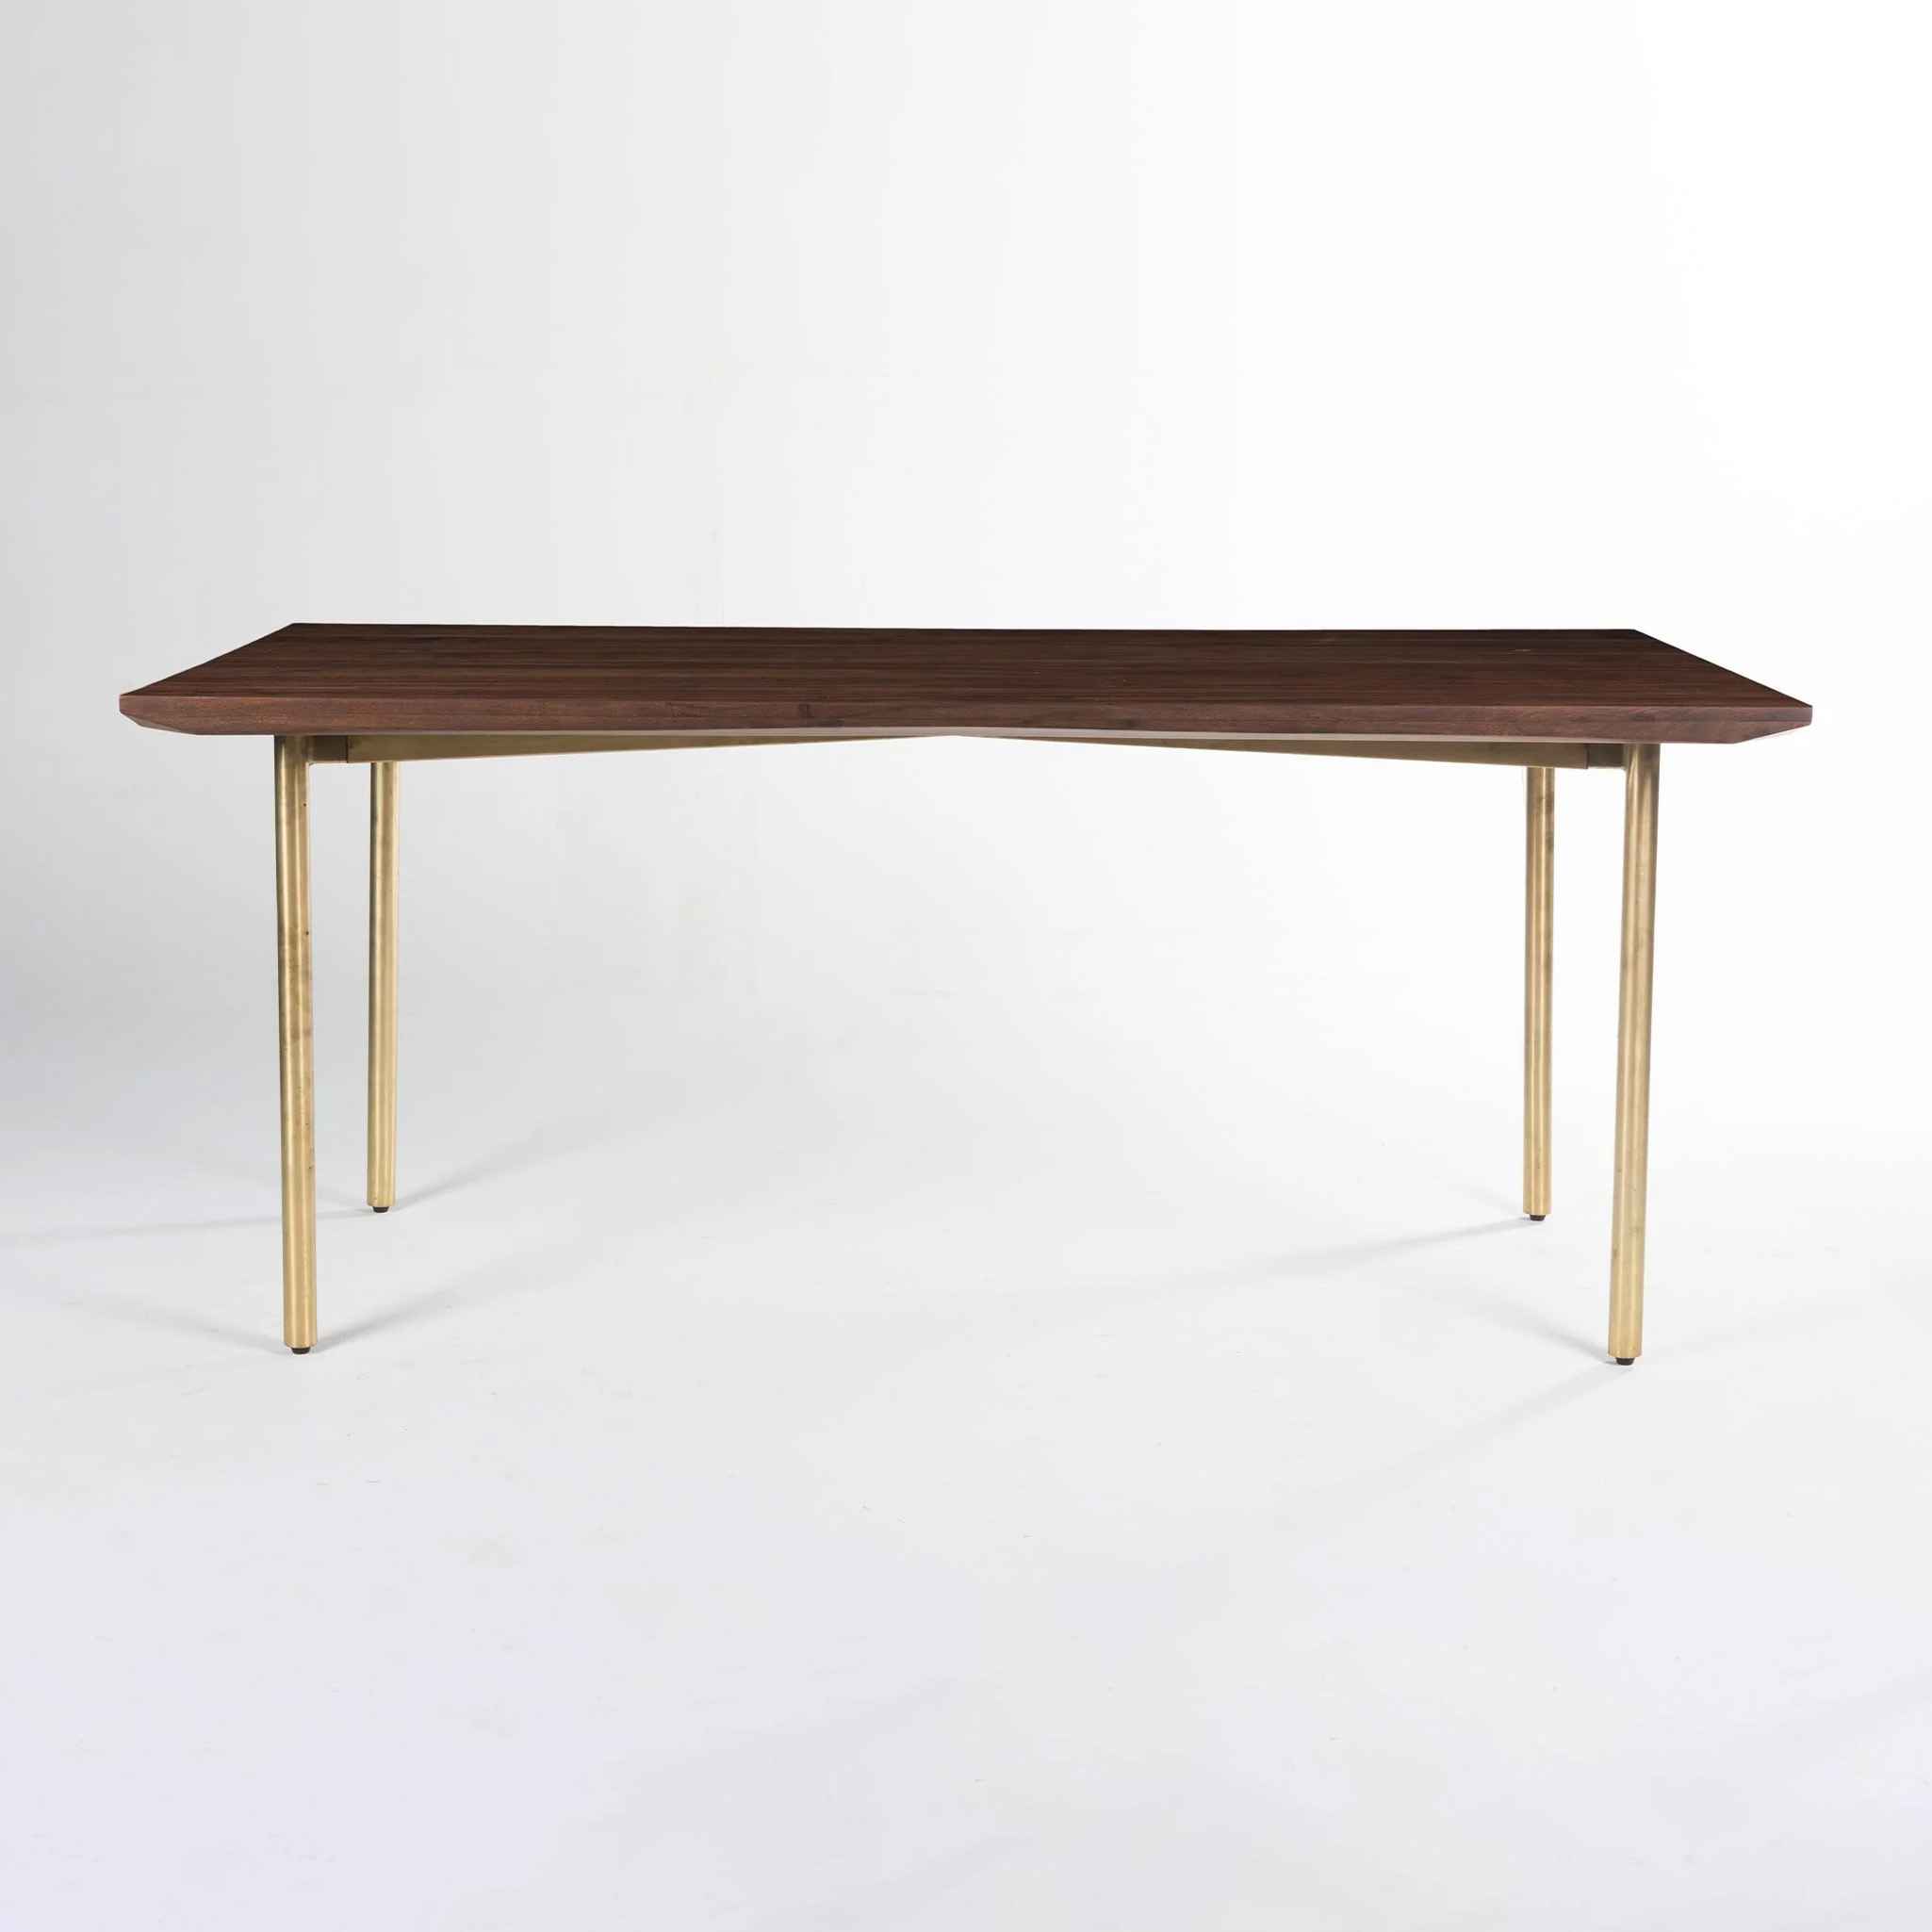 Barcelona Dining Table 6 Seater